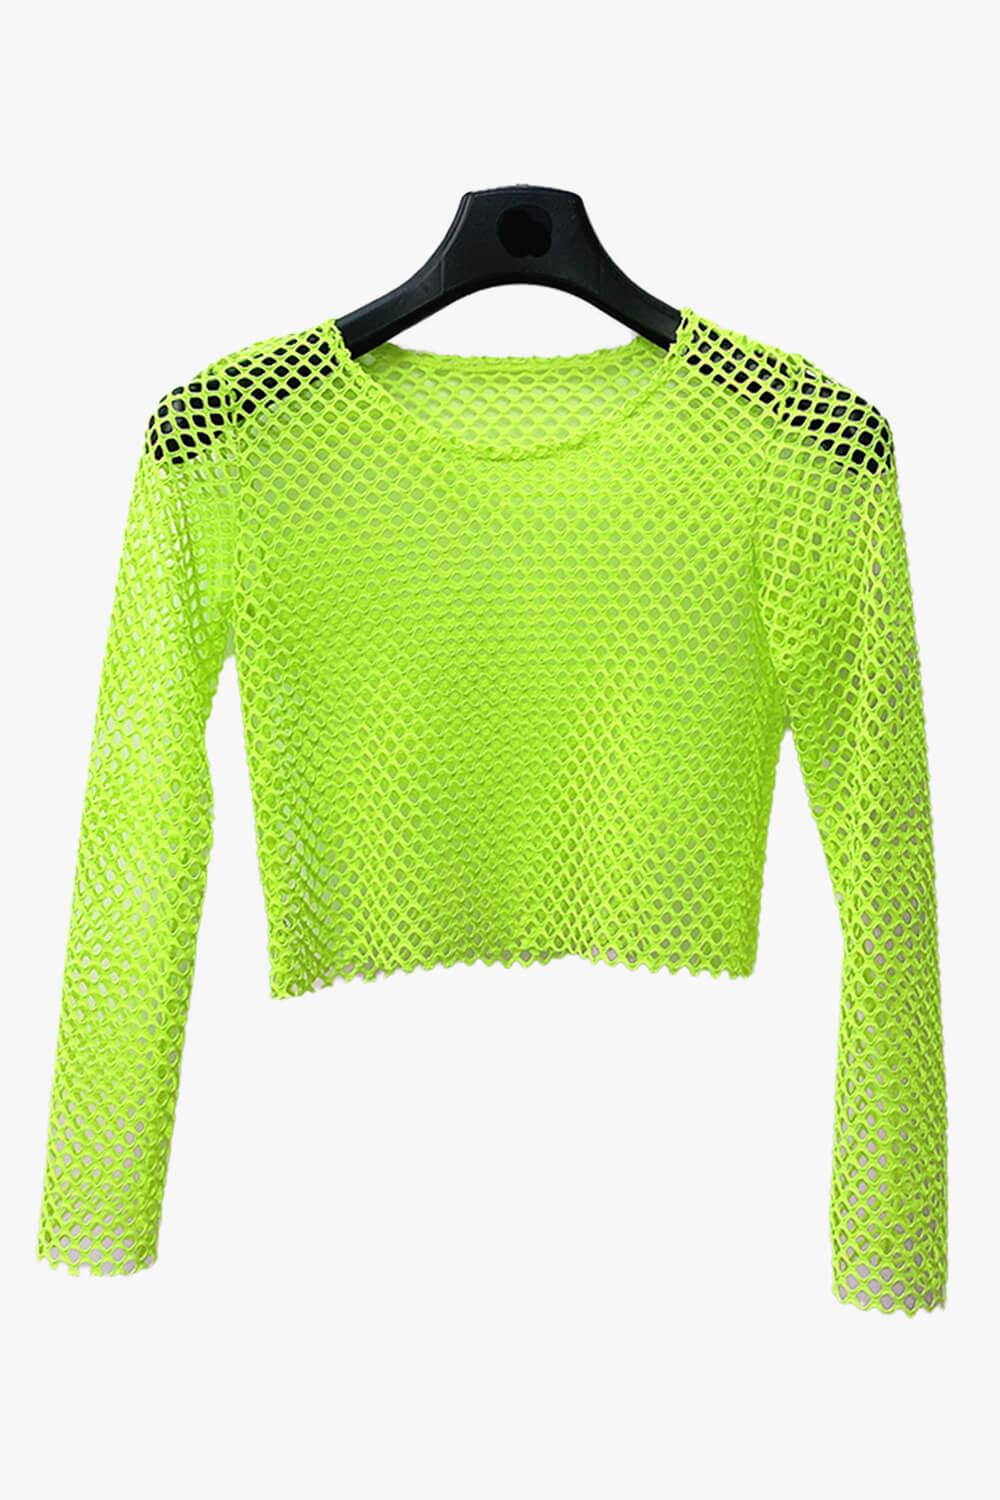 Long Sleeve Neon Fishnet Top - Aesthetic Clothes Shop